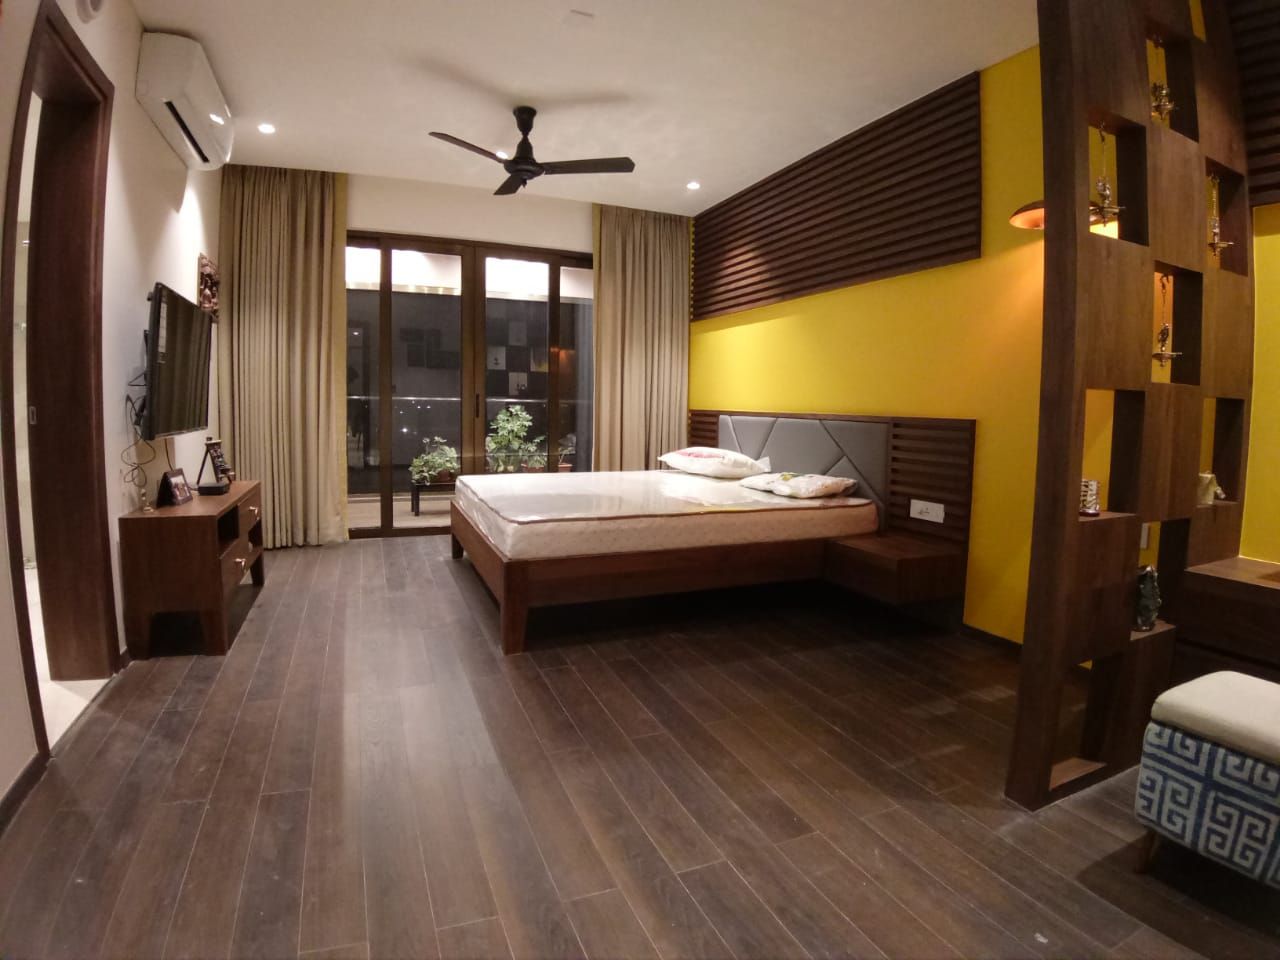 Interior work of 4.5 BHK apartment in kharadi, pune, Exemplary Services Exemplary Services غرفة نوم